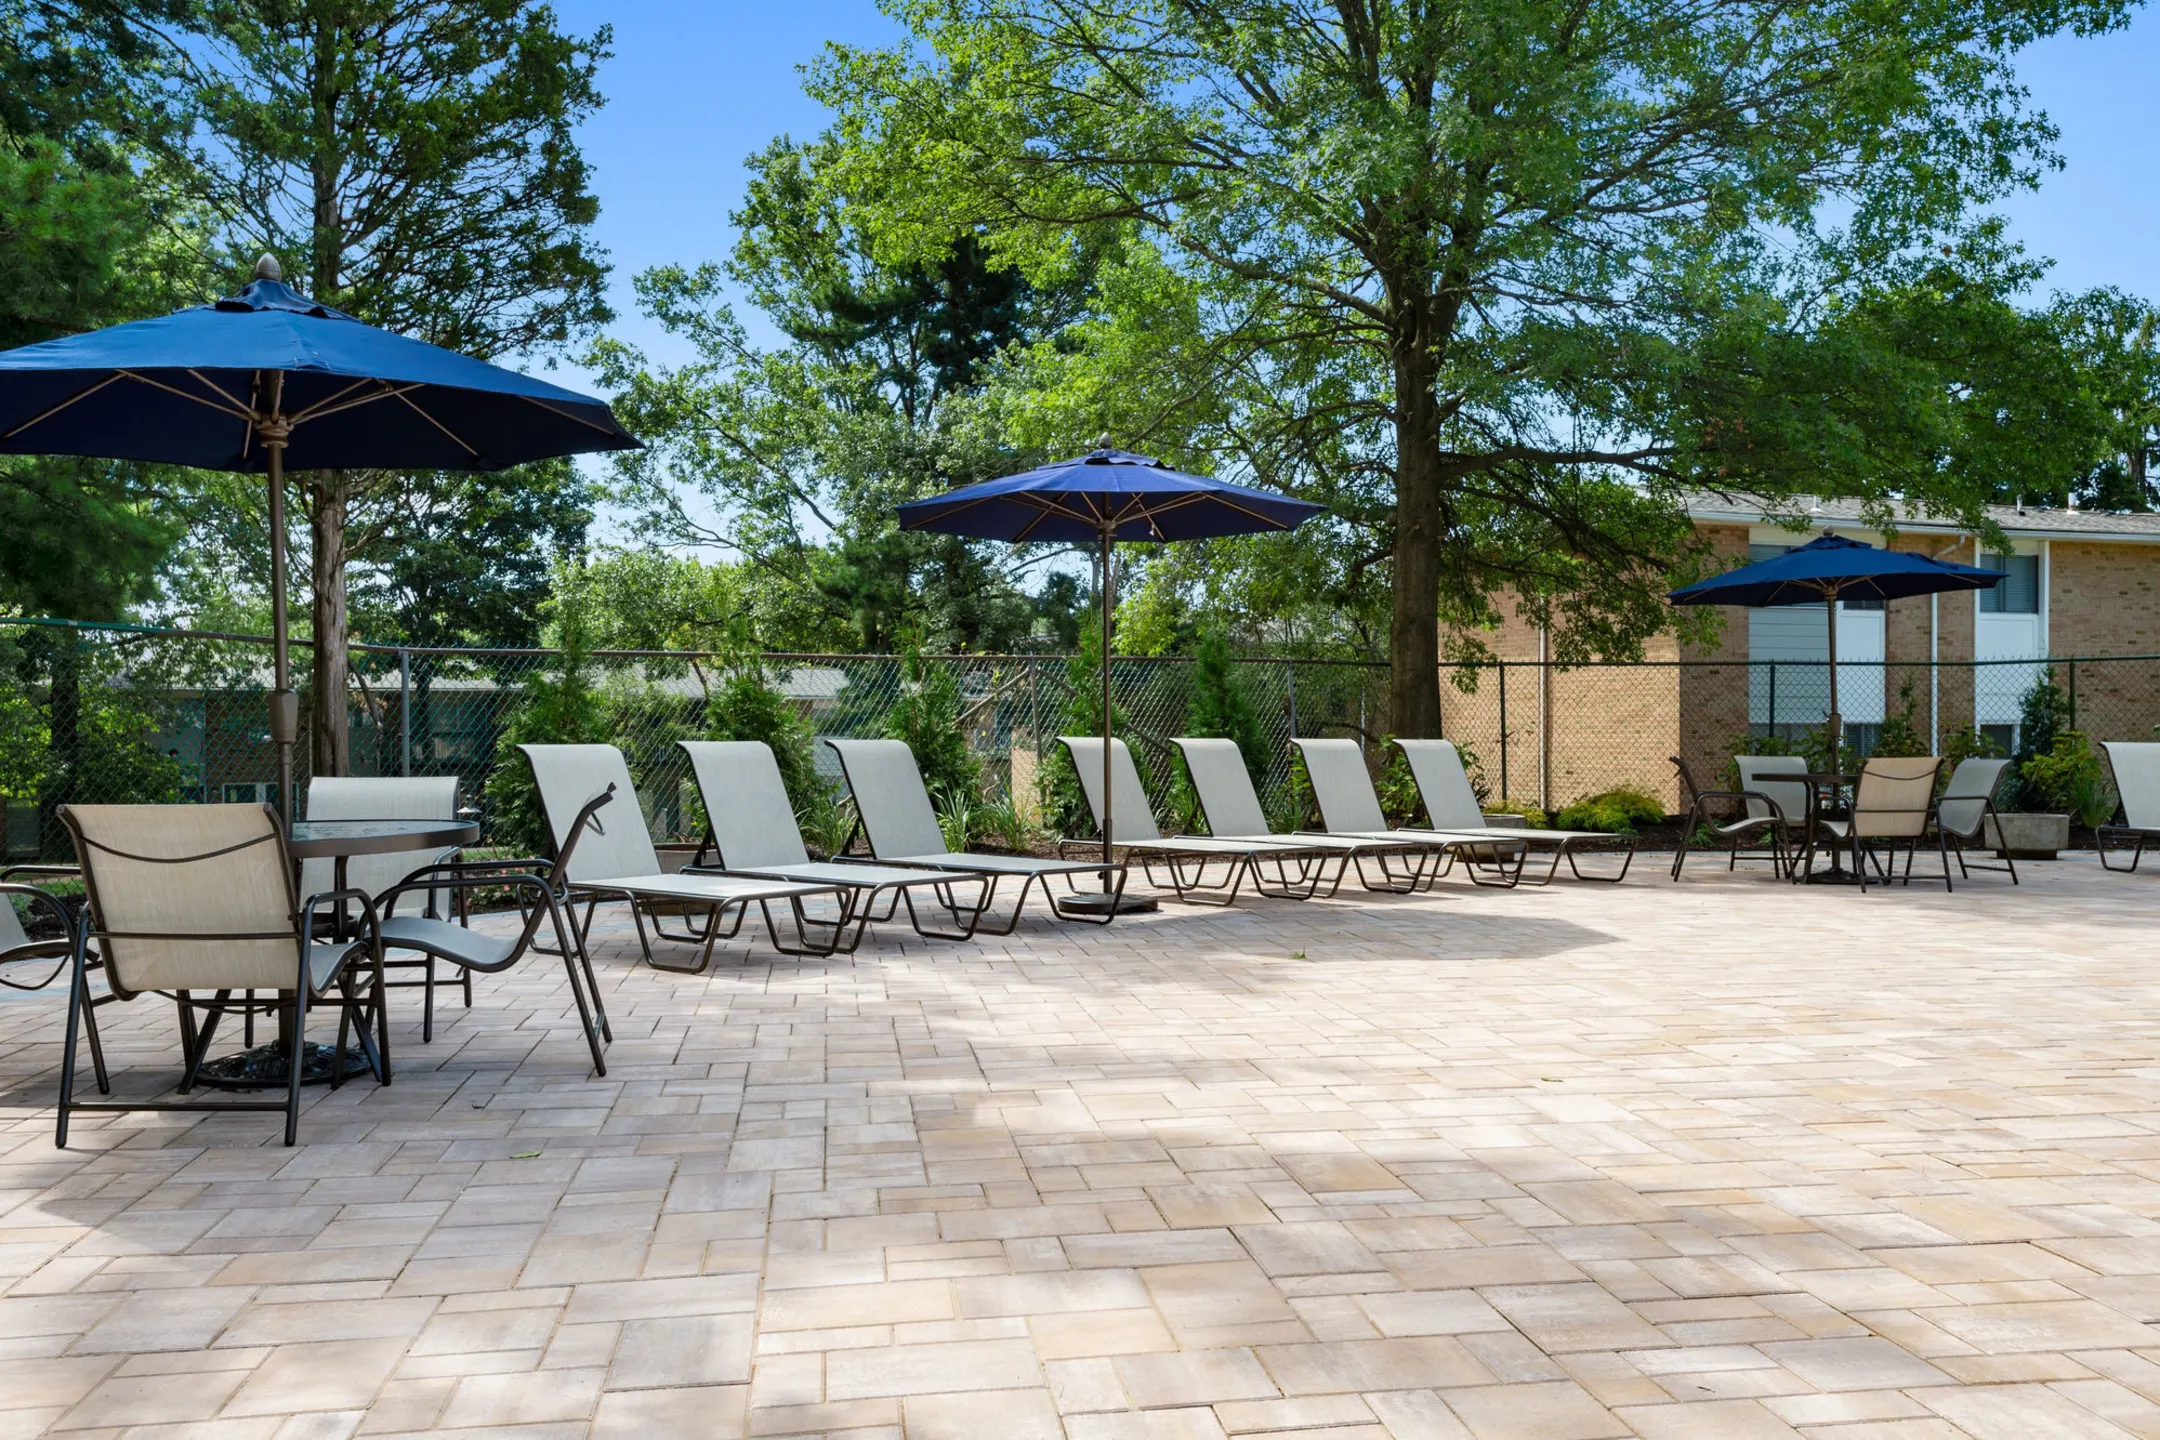 Patio / Deck - The Park at Franklin - Somerset, NJ